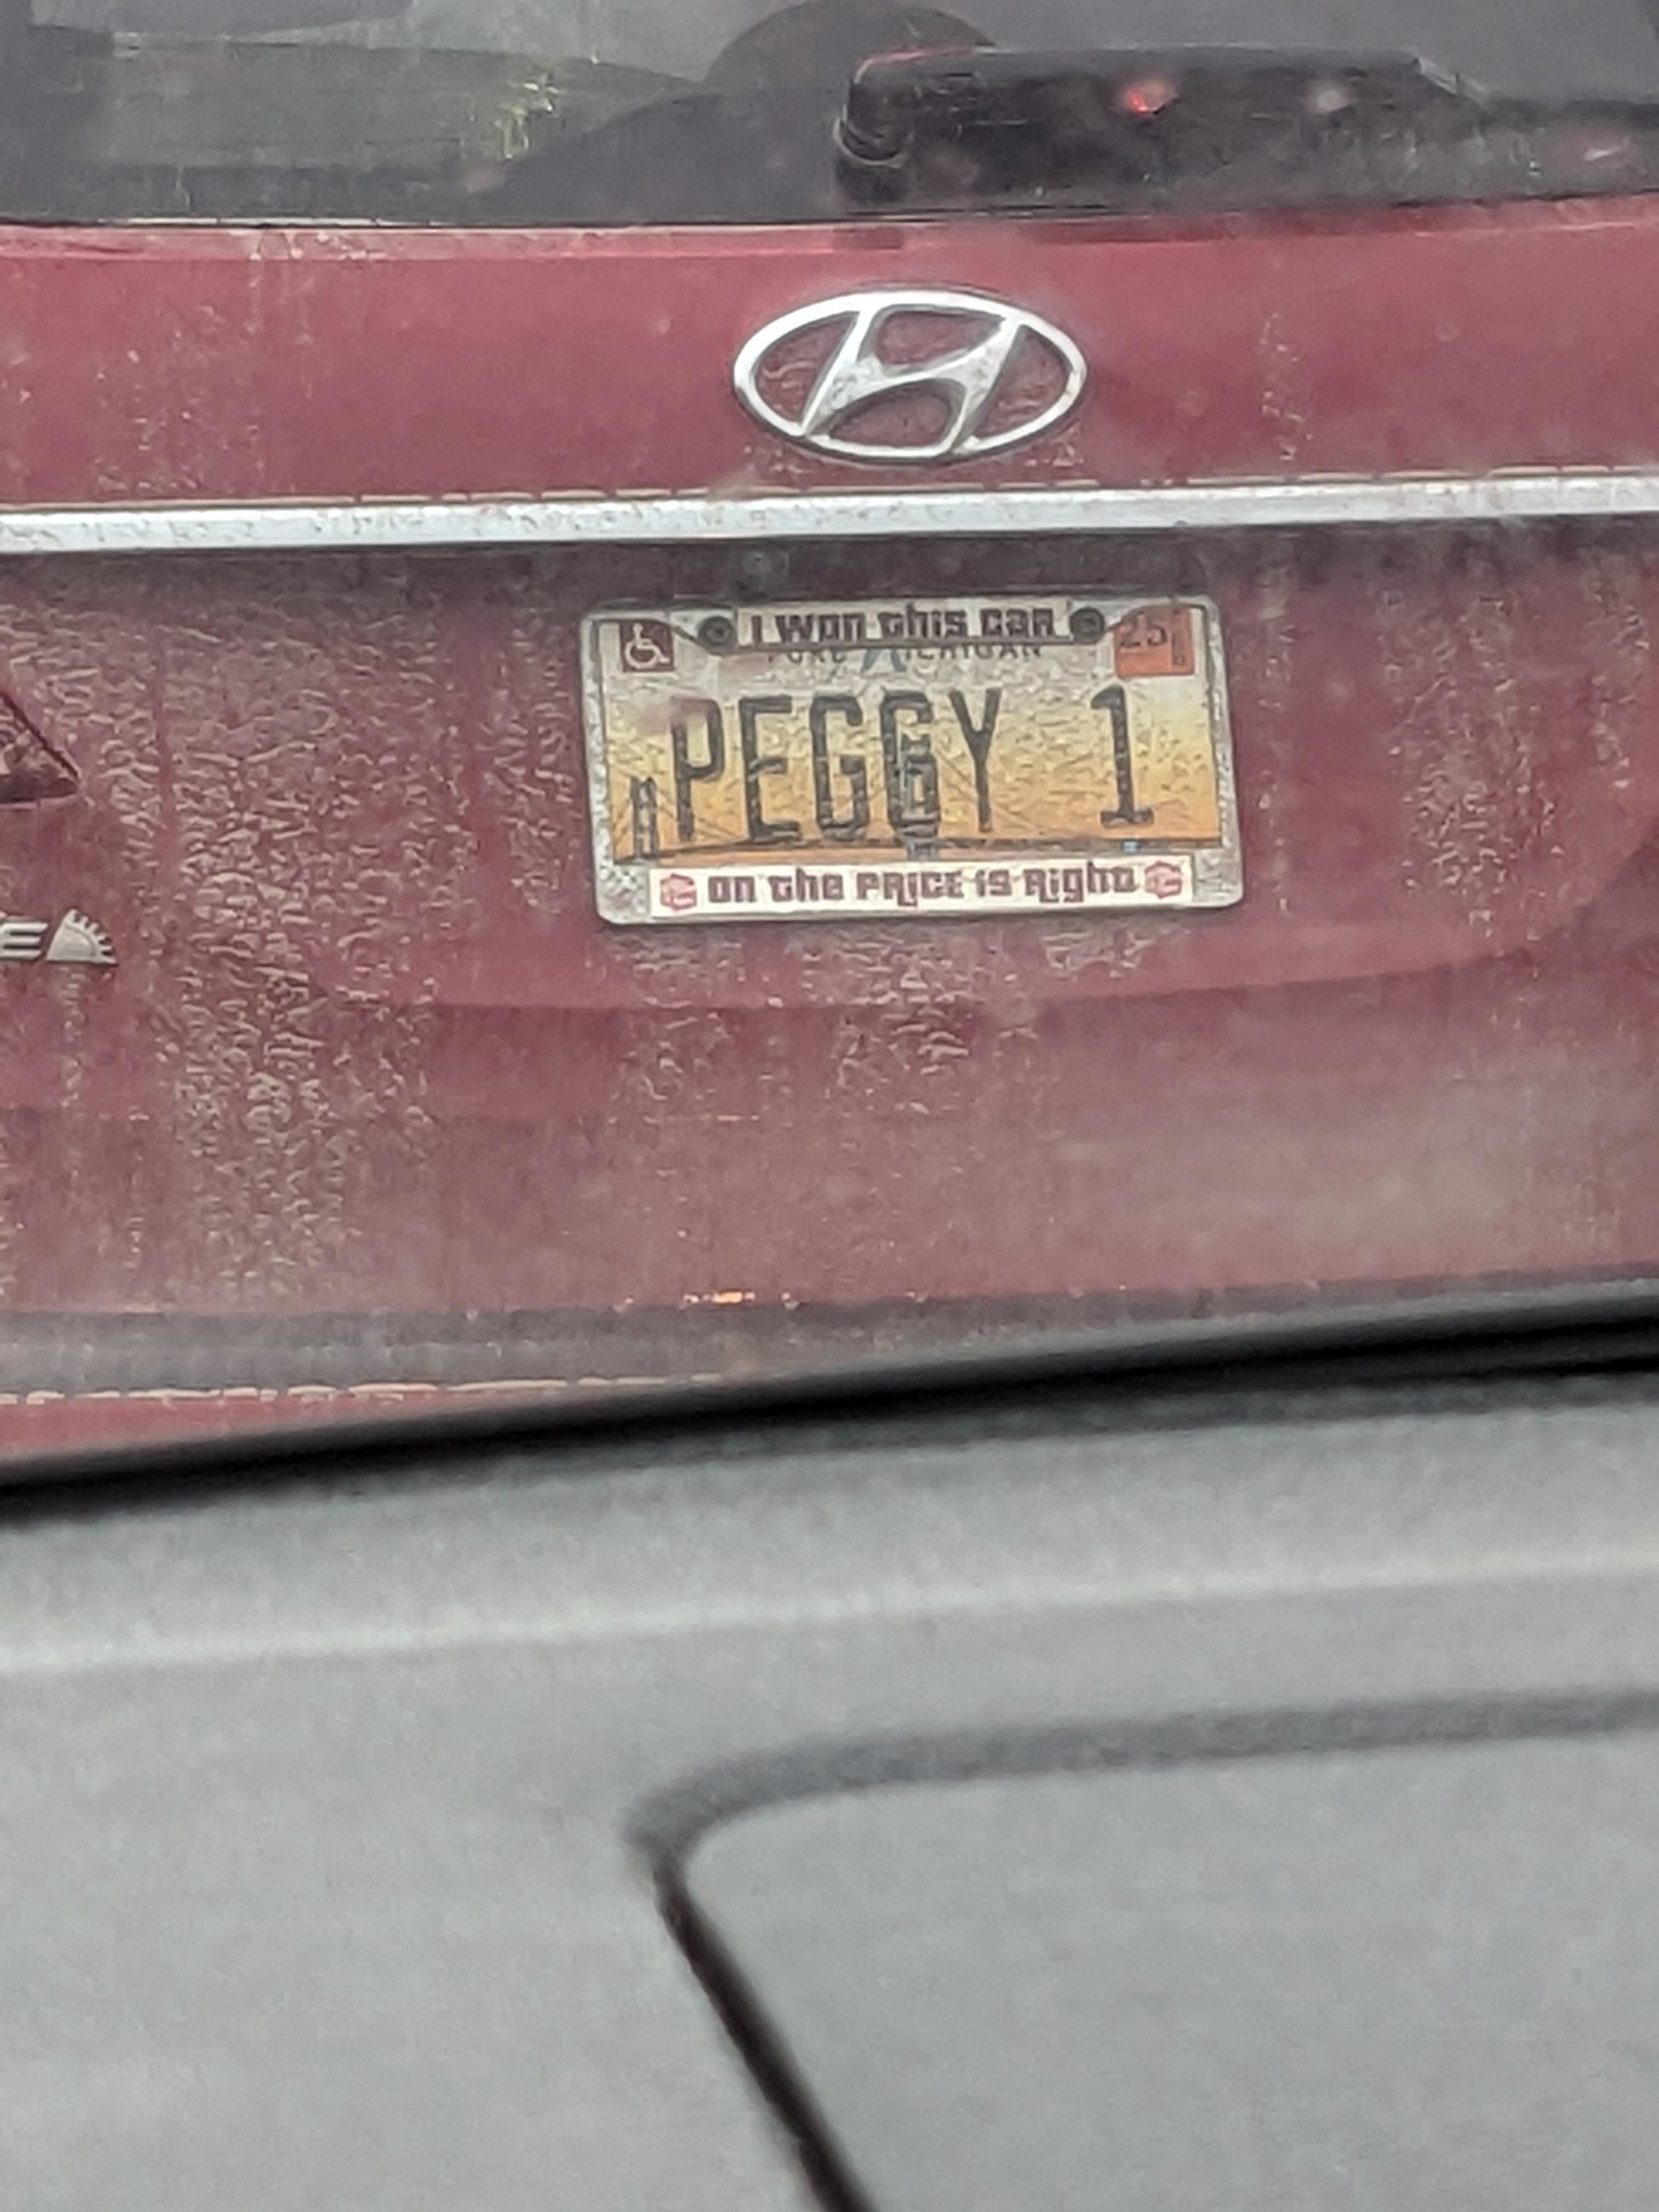 License plate reads &quot;PEGGY 1&quot; with a frame stating &quot;I won this car on The Price is Right.&quot; Vehicle appears dusty